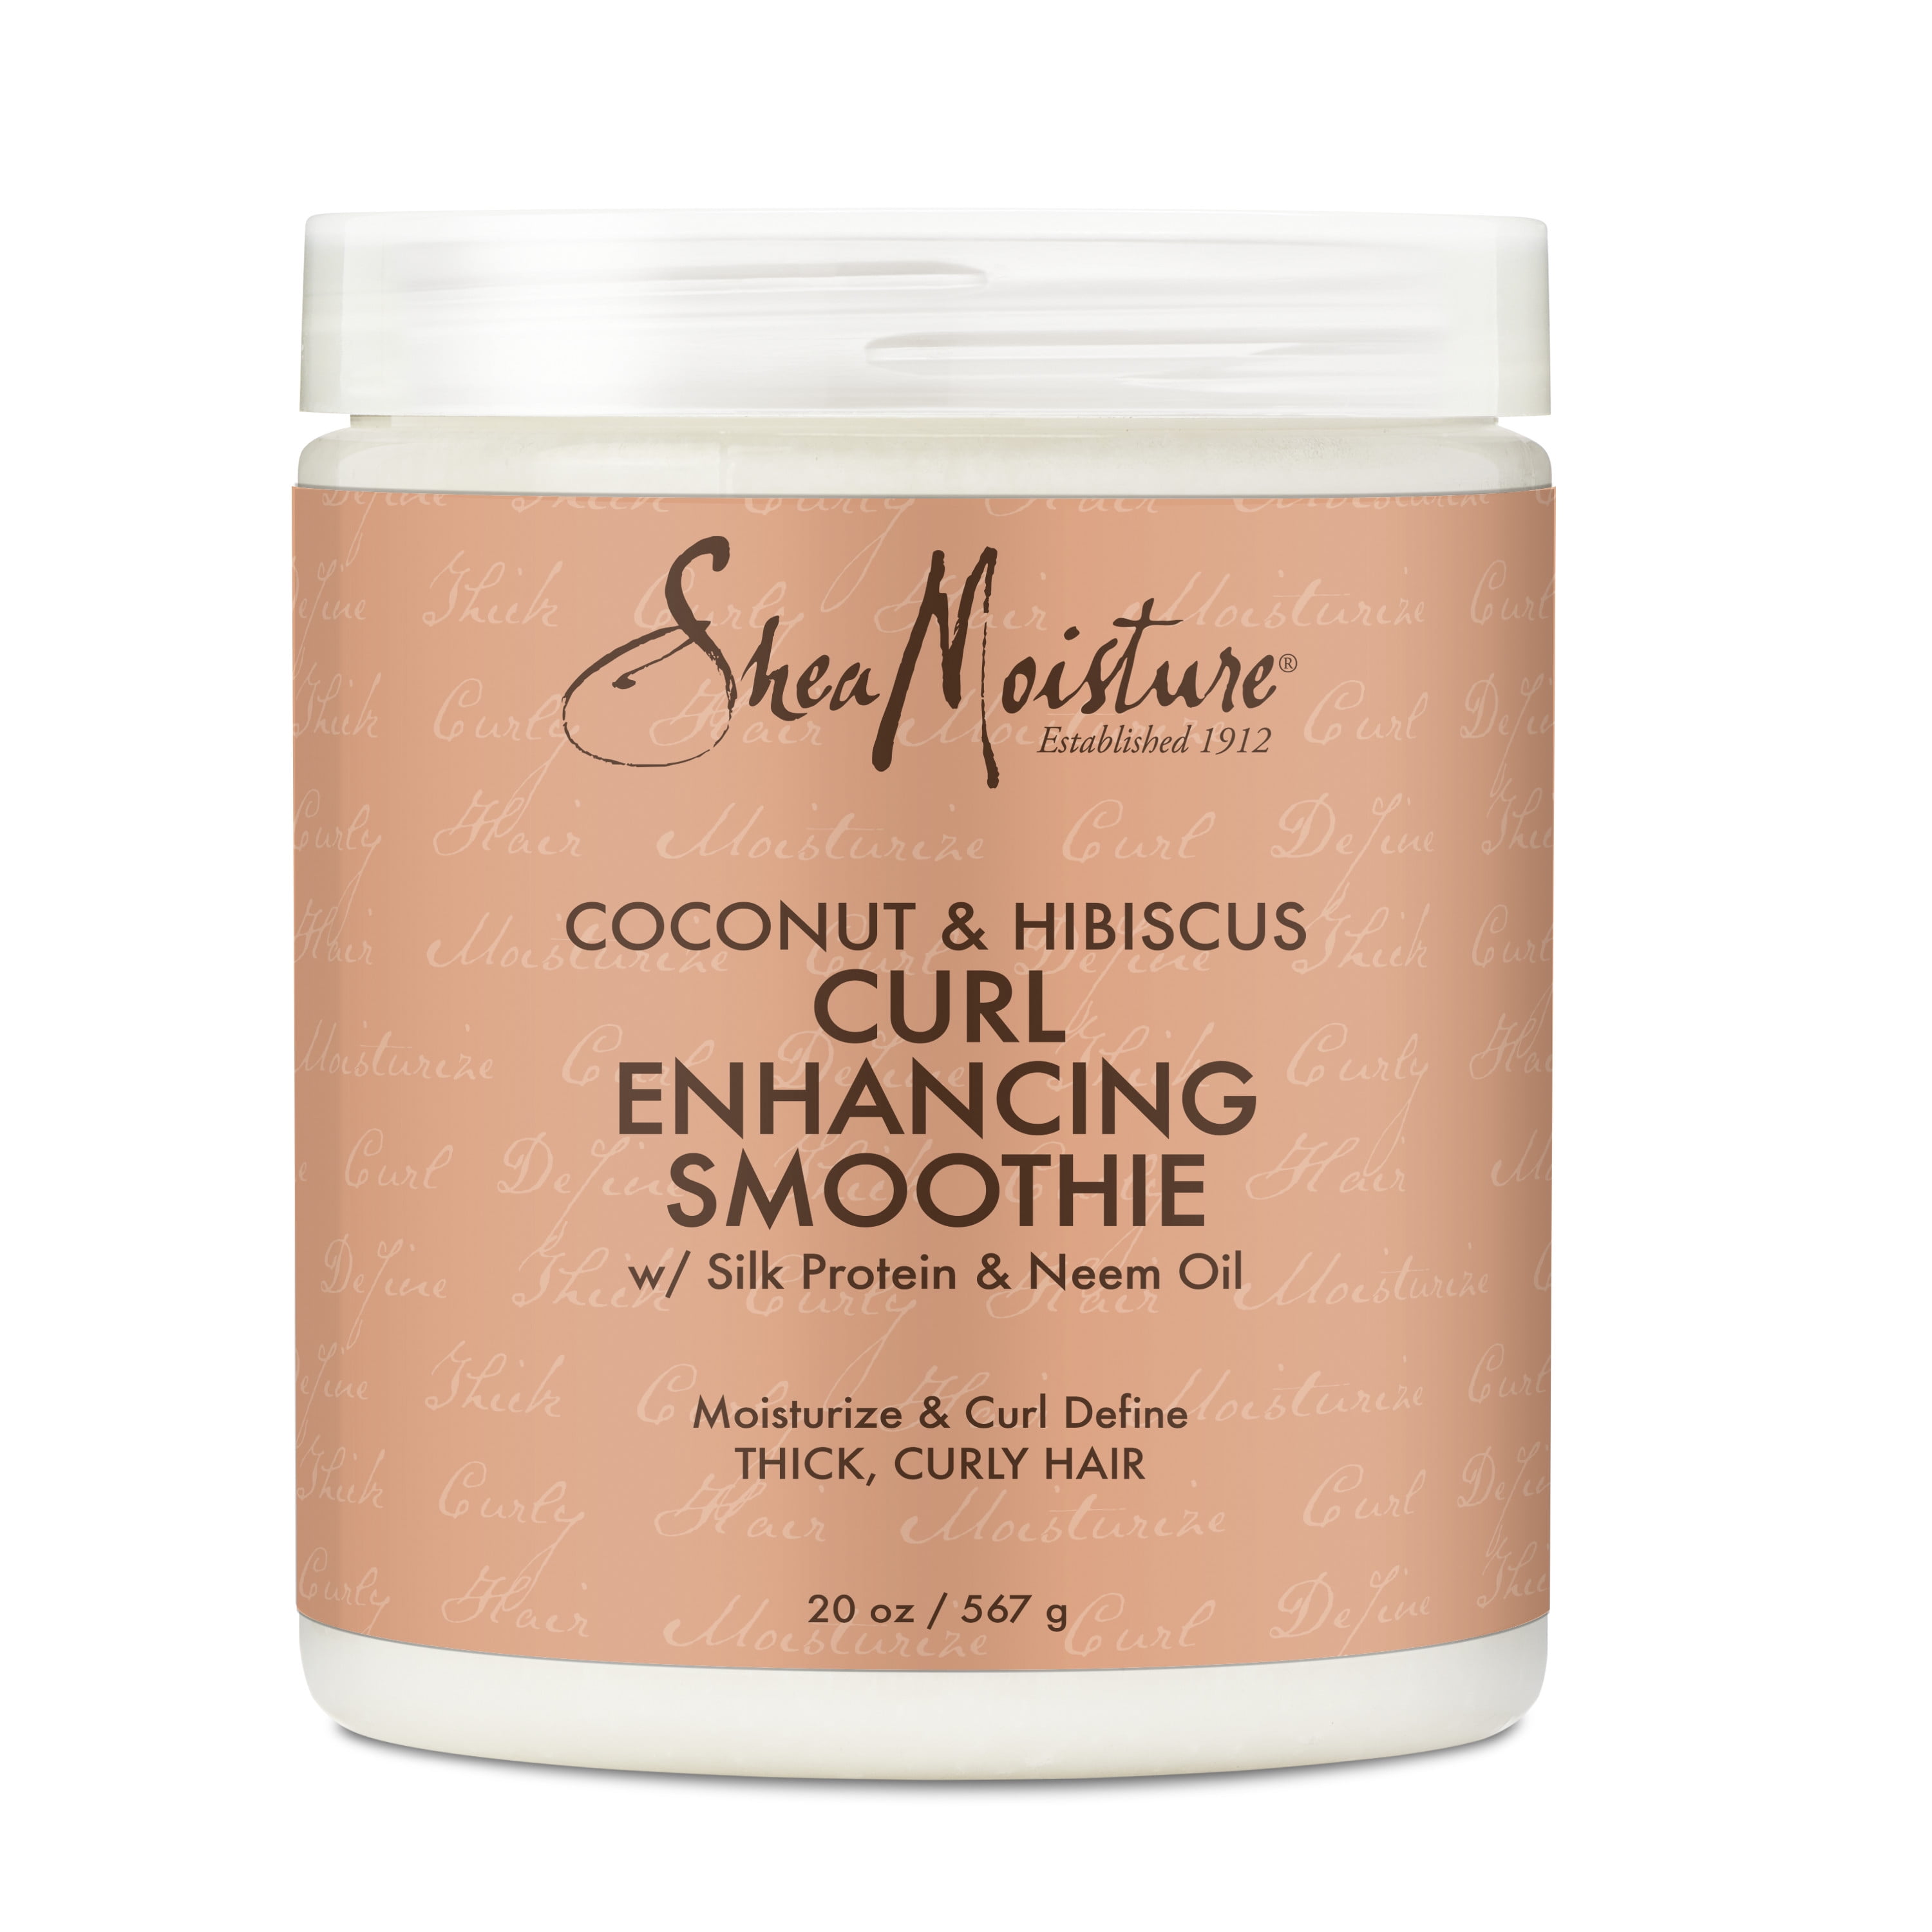 SheaMoisture Coconut and Hibiscus Smoothie Curl Enhancing Cream, 20 oz